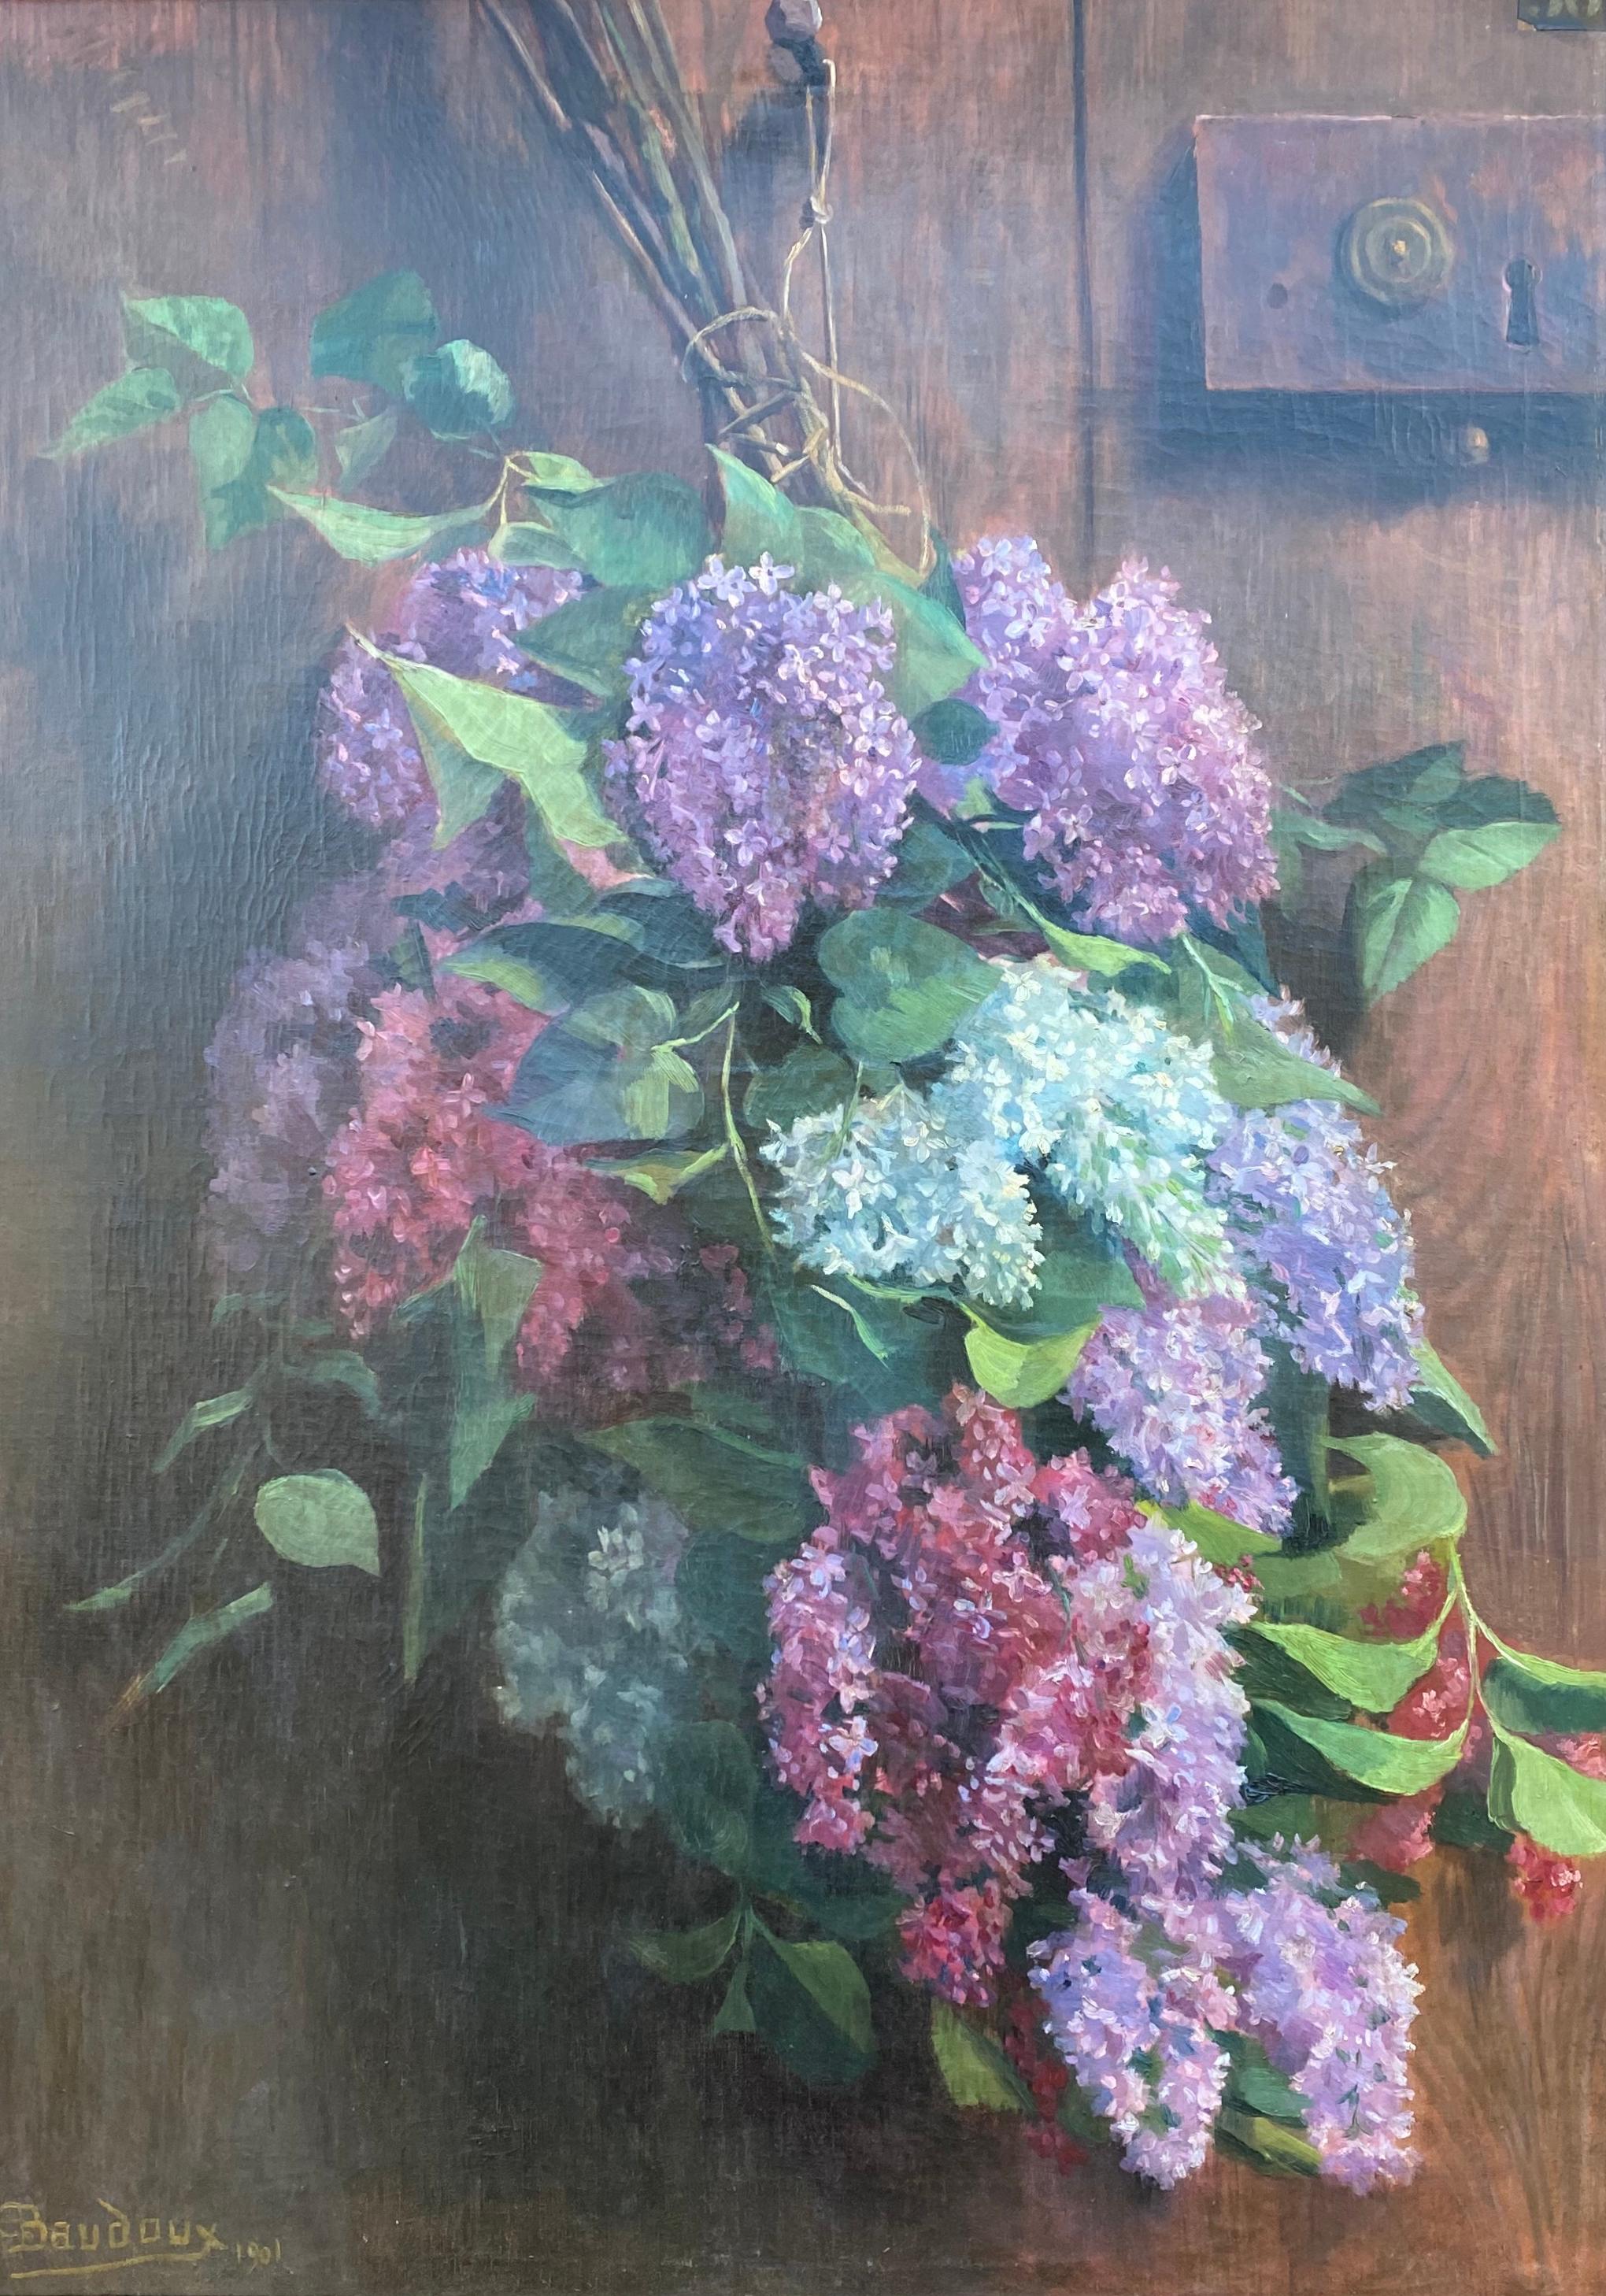 Lilac flowers at the door, 1901 uplifting floral still life large oil on canvas - Painting by Henri Baudoux